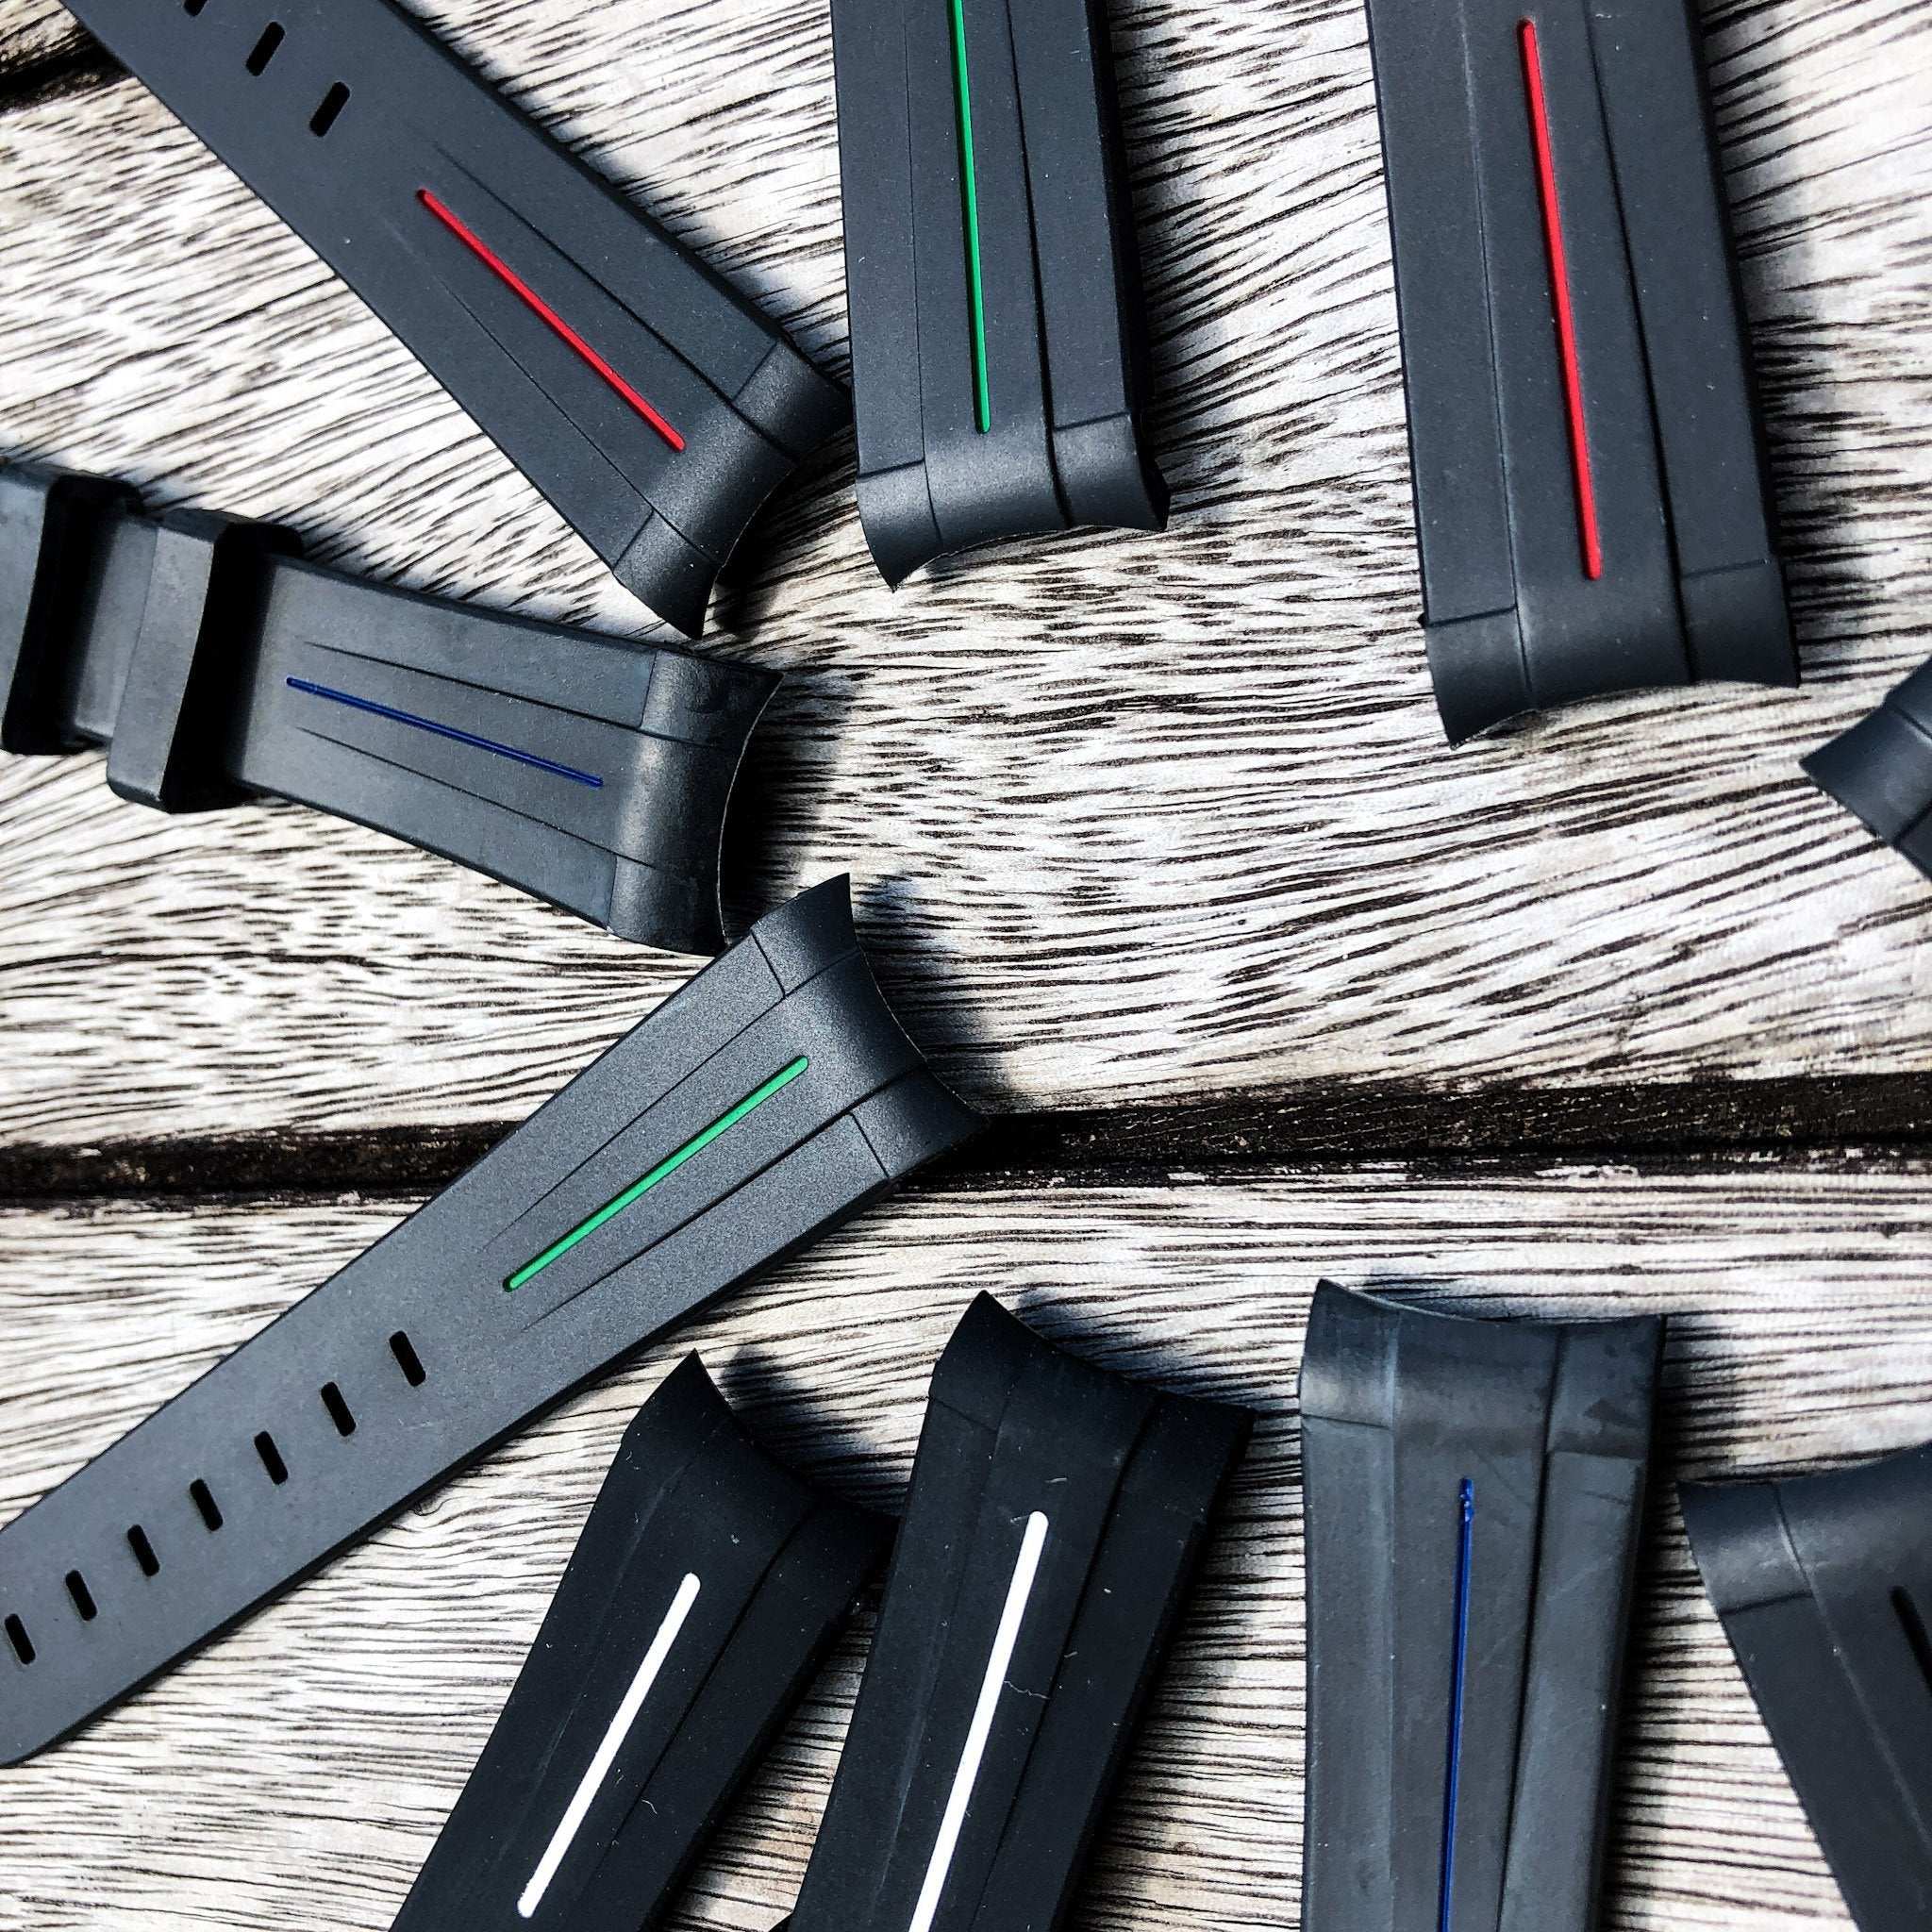 Aqua Series | Black with Red Line Rubber Watch Strap For Rolex with Curved End - Samurai Vintage Co.